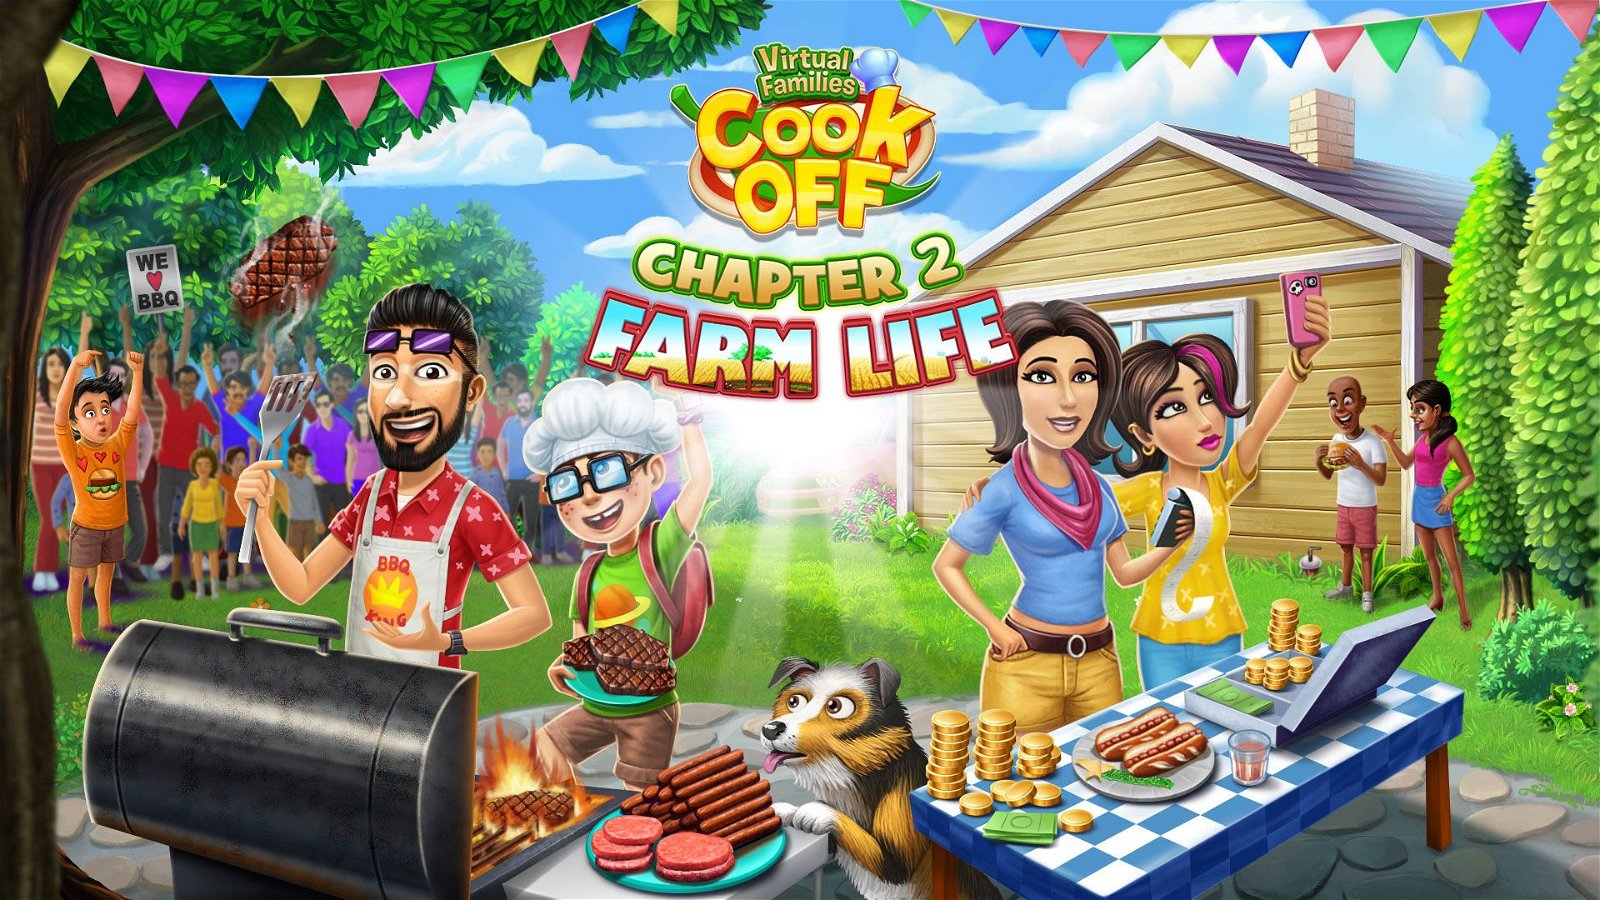 Image of Virtual Families Cook Off: Chapter 2 Farm Life